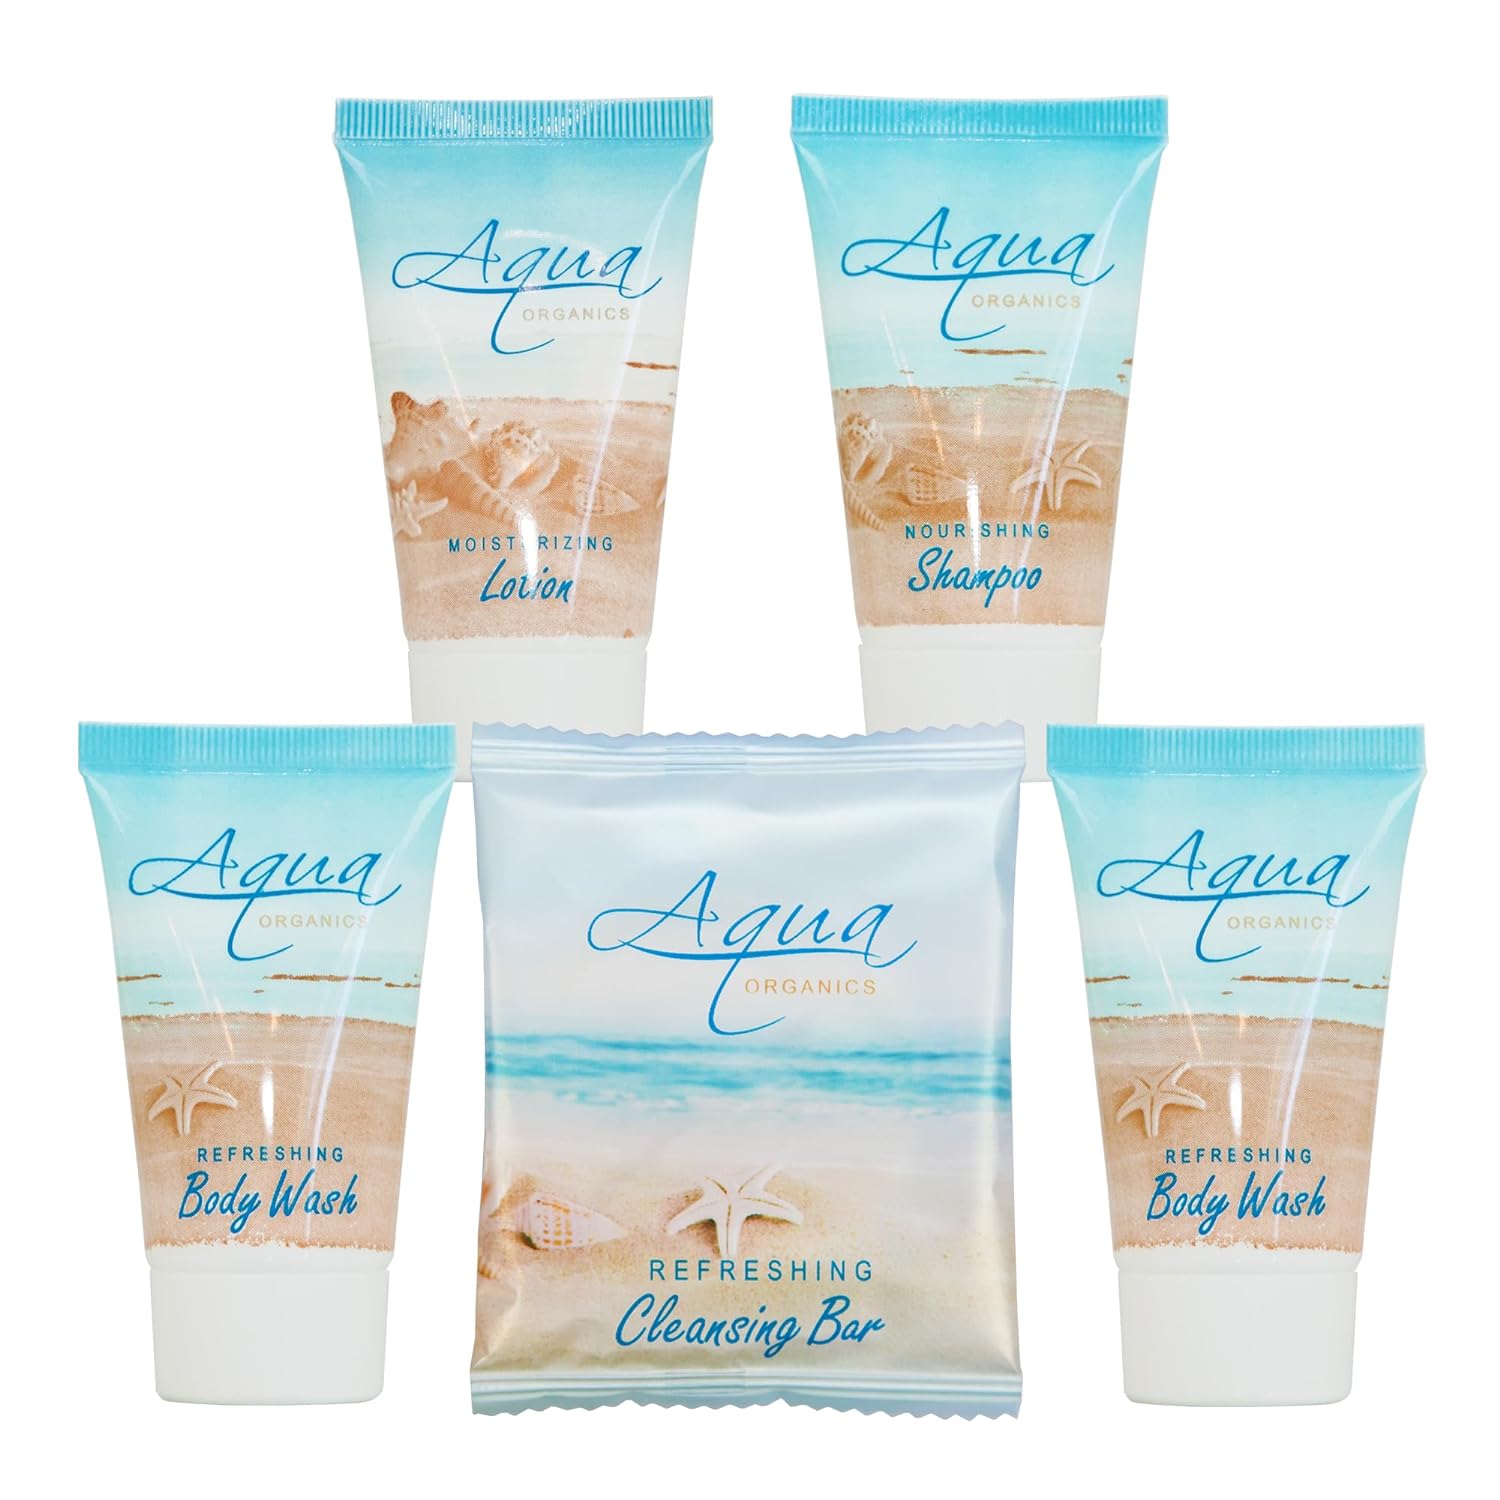 Aqua Organics Hotel Soaps and Toiletries Bulk Set | 1-Shoppe All-In-Kit Amenities for Hotels & Airbnb | 1 Hotel Shampoo & Conditioner, Body Wash, Body Lotion & 1 Bar Soap Travel Size | 75 Pieces